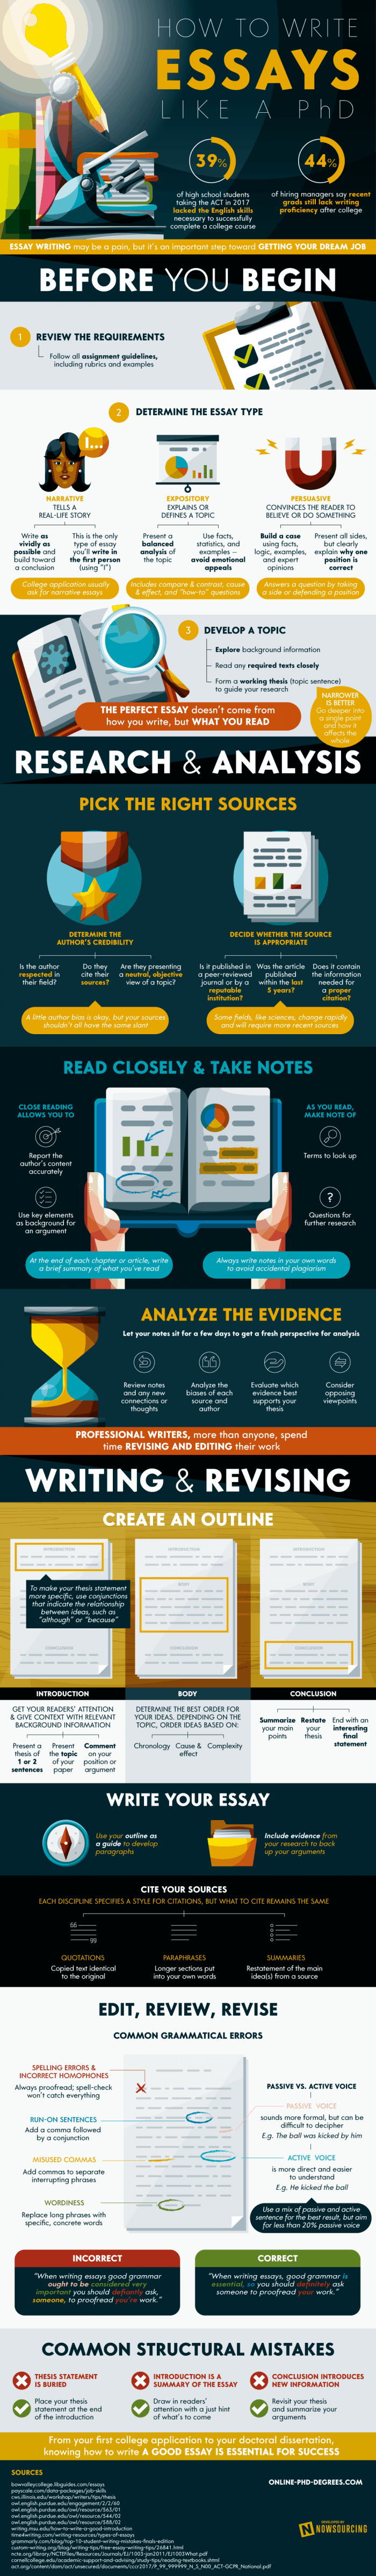 how to write essay infographic